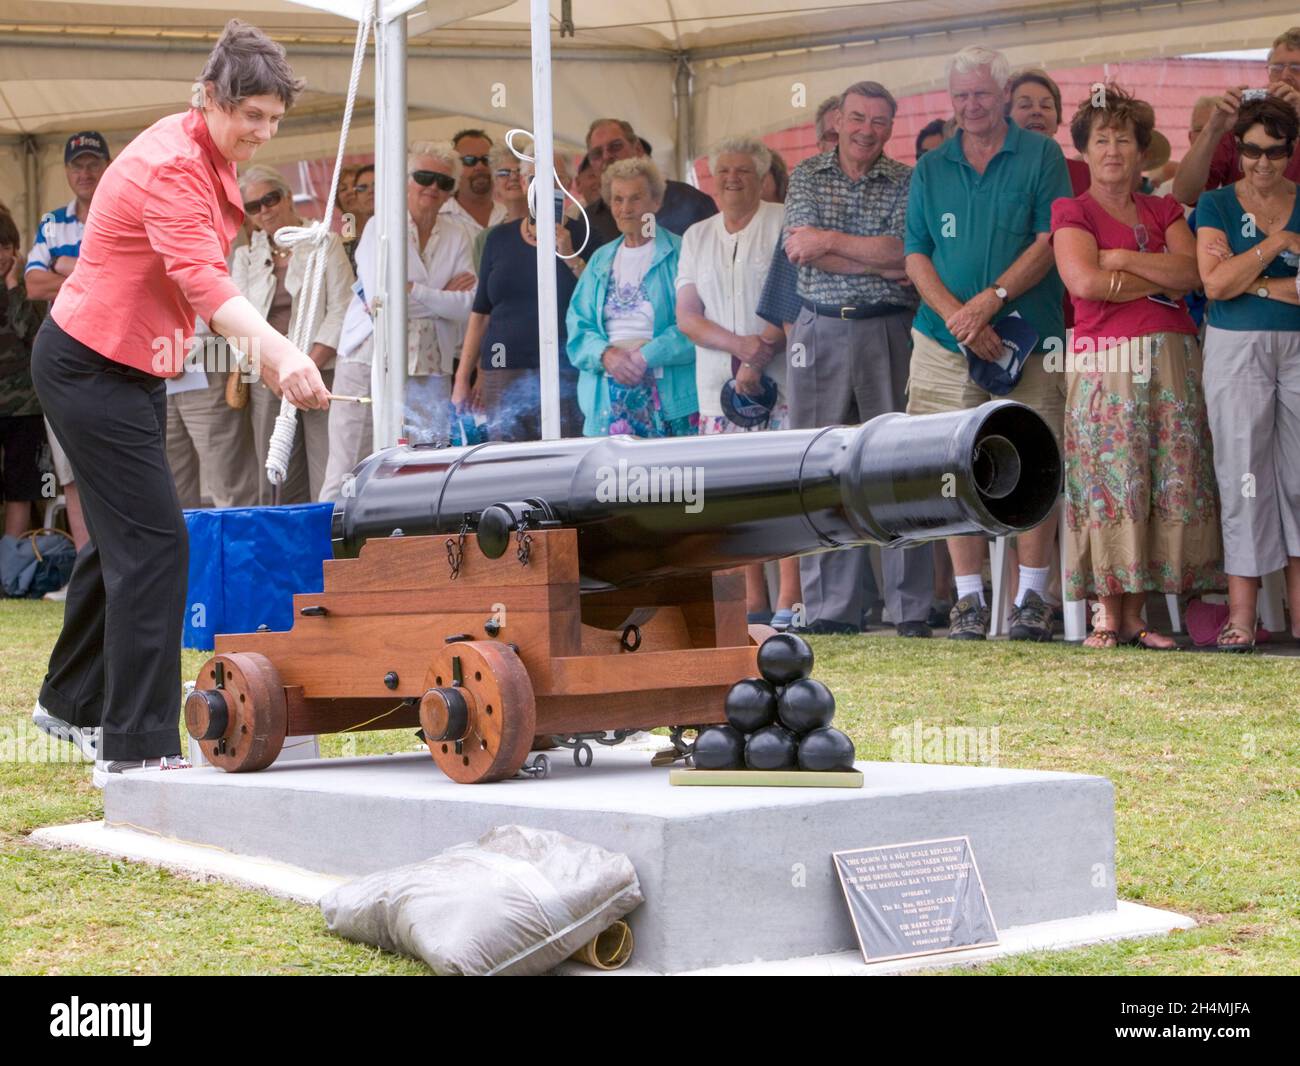 Prime Minister Helen Clark prepares to fire the memorial canon to commemorate HMS Orpheus, New Zealand's worst shipwreck at Manukau Harbour bar on 7 February 1863 with the loss of 189 lives, Rose Gardens Reserve, Mangere Bridge, New Zealand on Tuesday 6 February 2007. Stock Photo